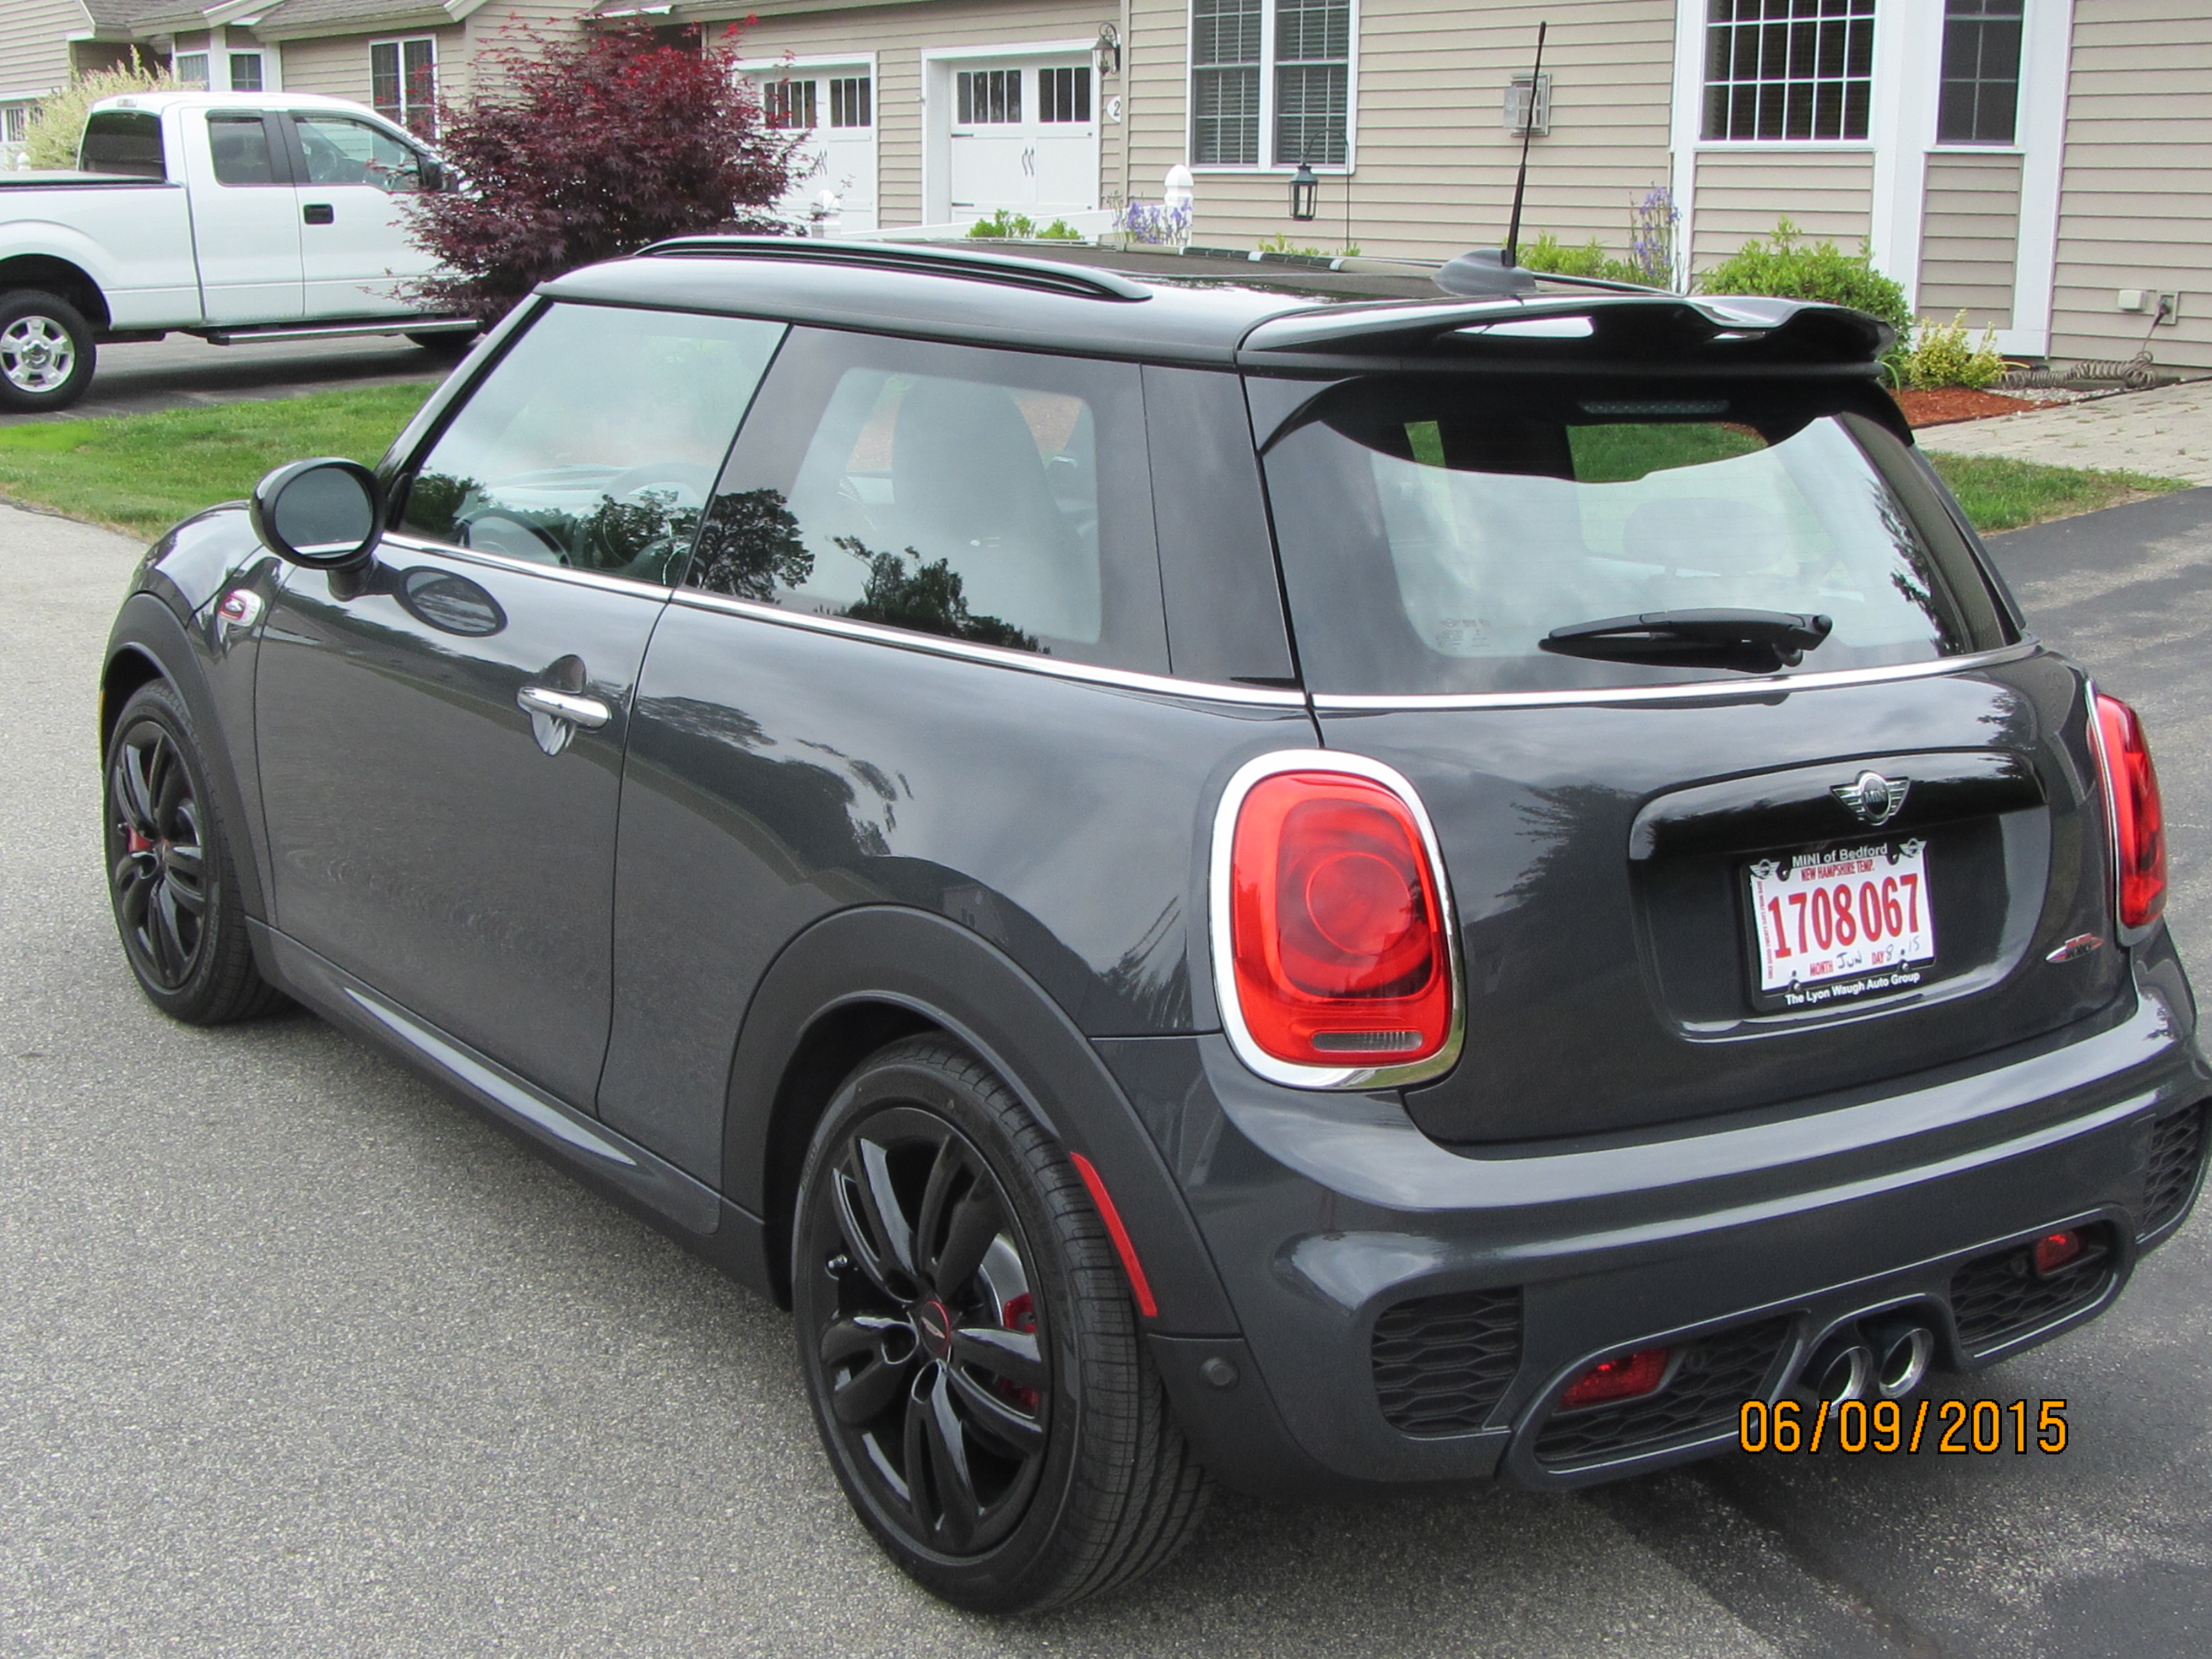 Thunder Grey with Black roof, F56JCW added to the group - North ...